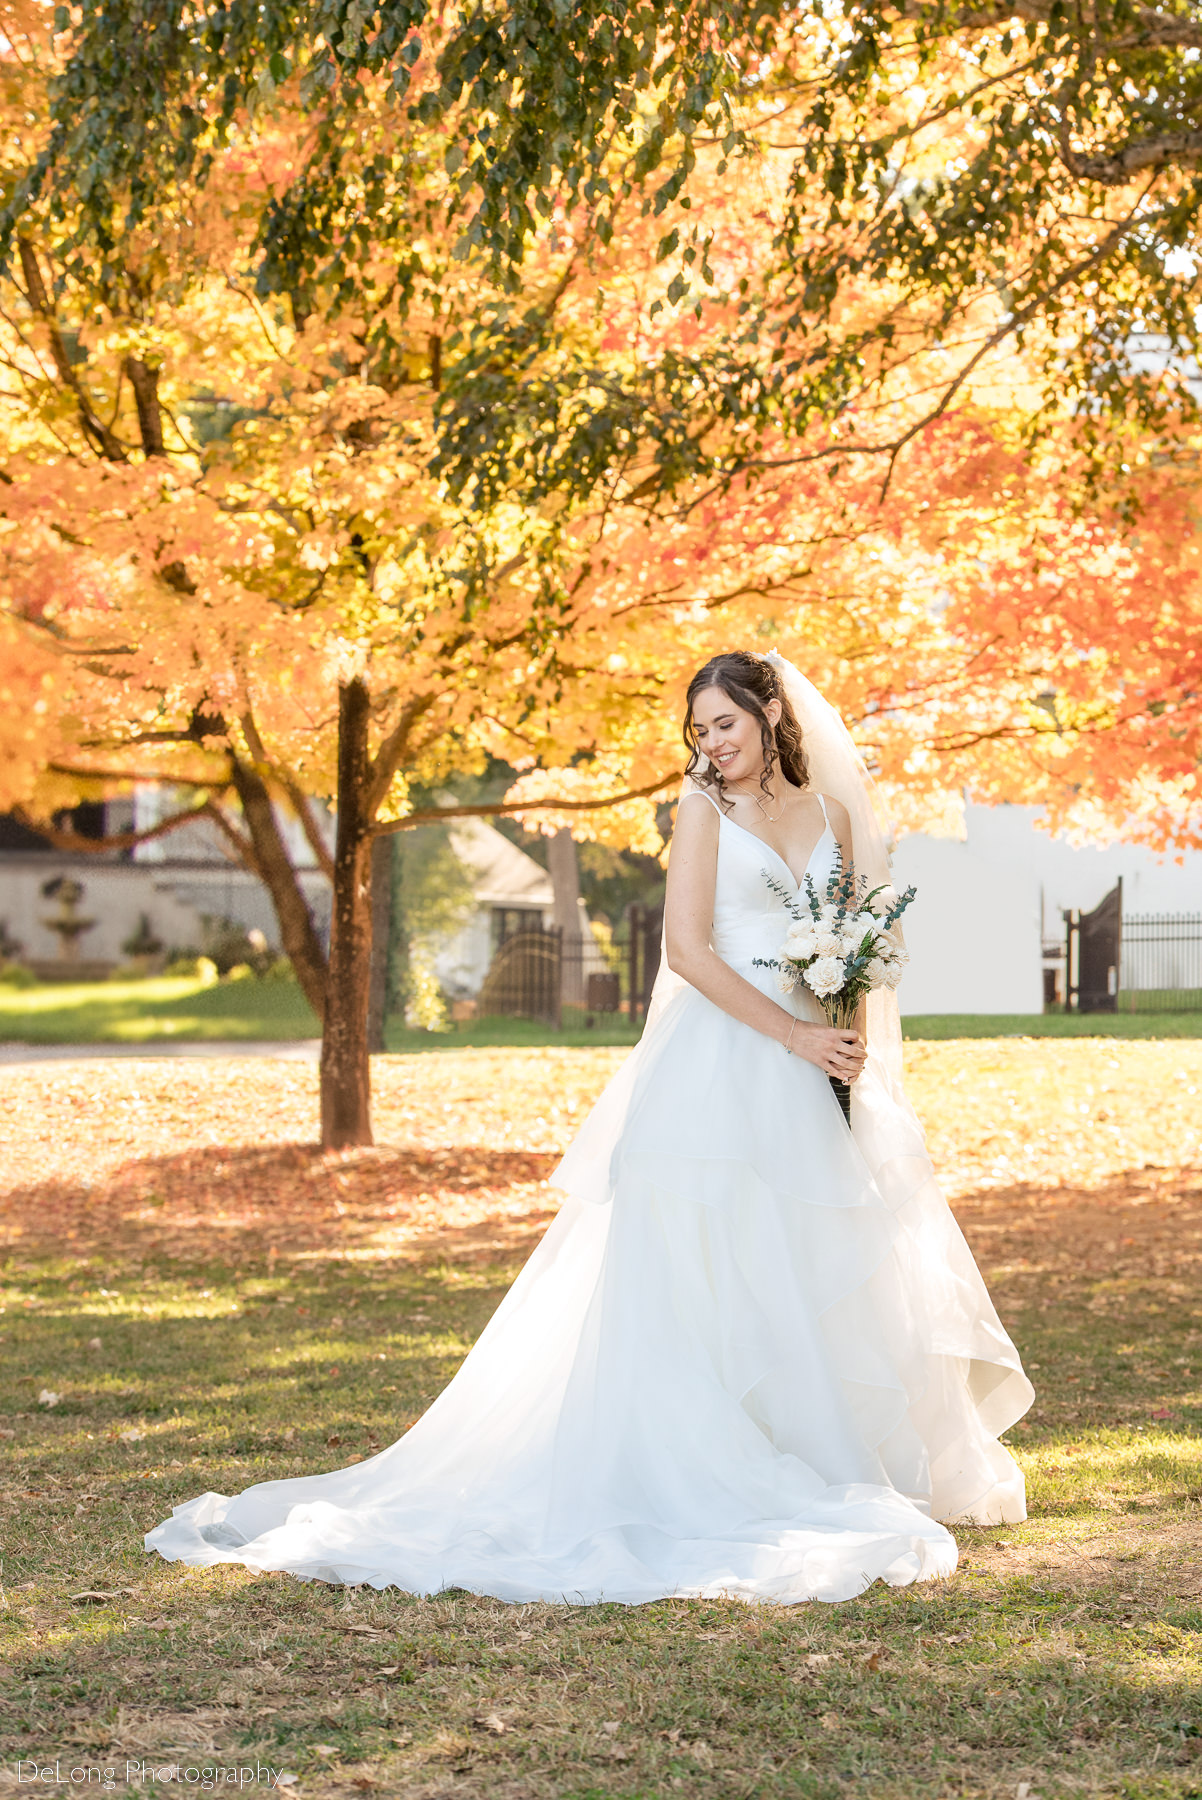 Bridal portrait in front of orange and yellow fall trees at Freedom Park by Charlotte wedding photographers DeLong Photography